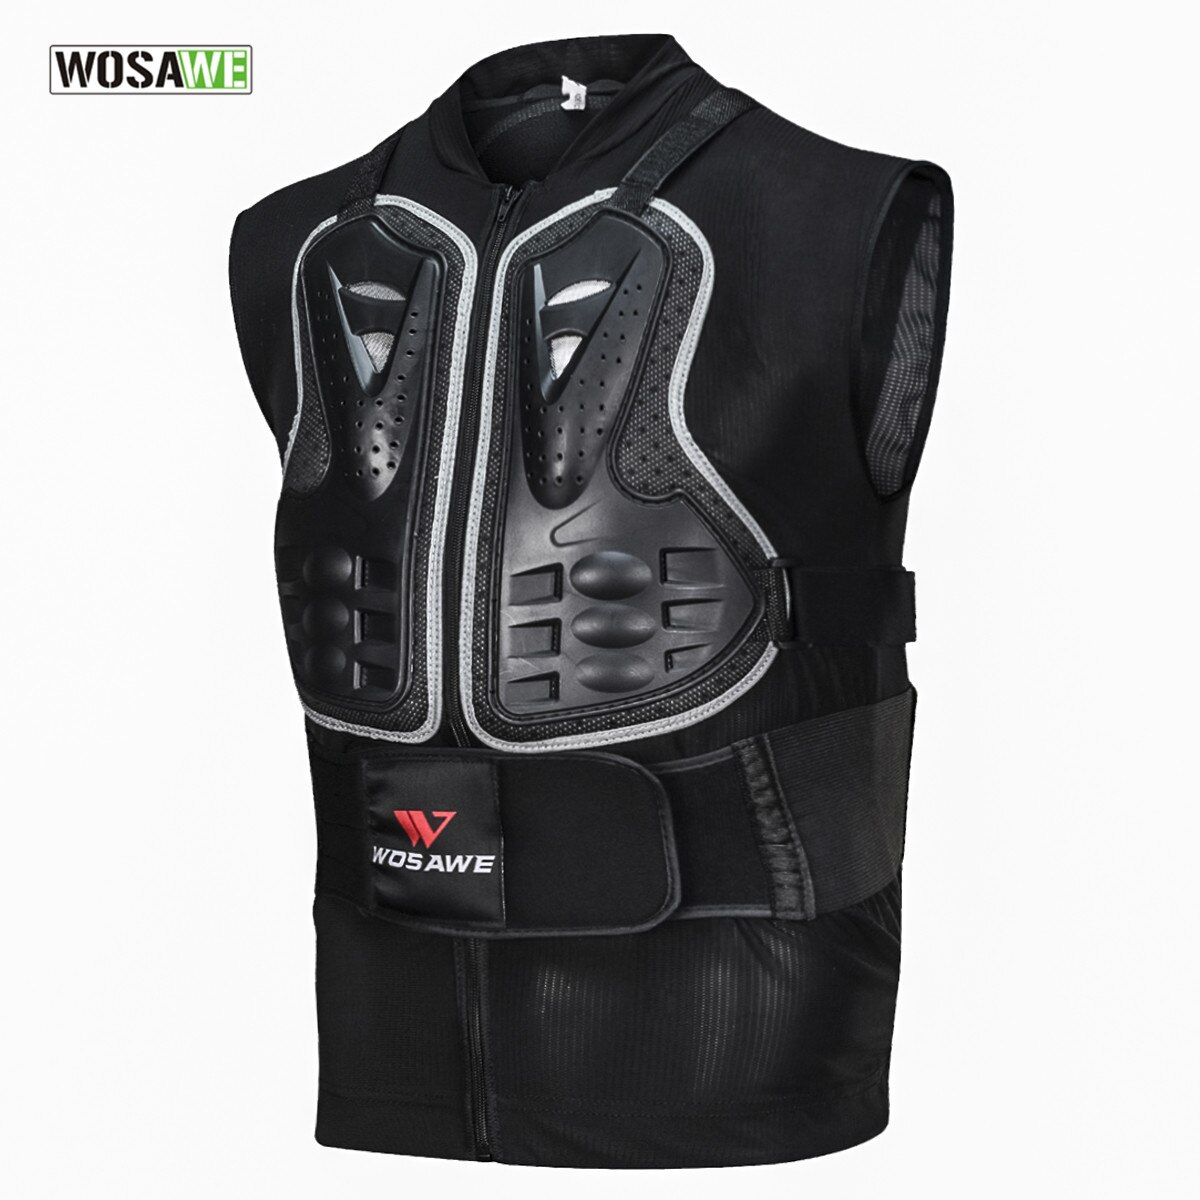 WOSAWE Sleeveless Body Armor Protective Vest Motorcycle Protect Armor Vest Motocross Cycling Equipment Cool Mesh Body Protective